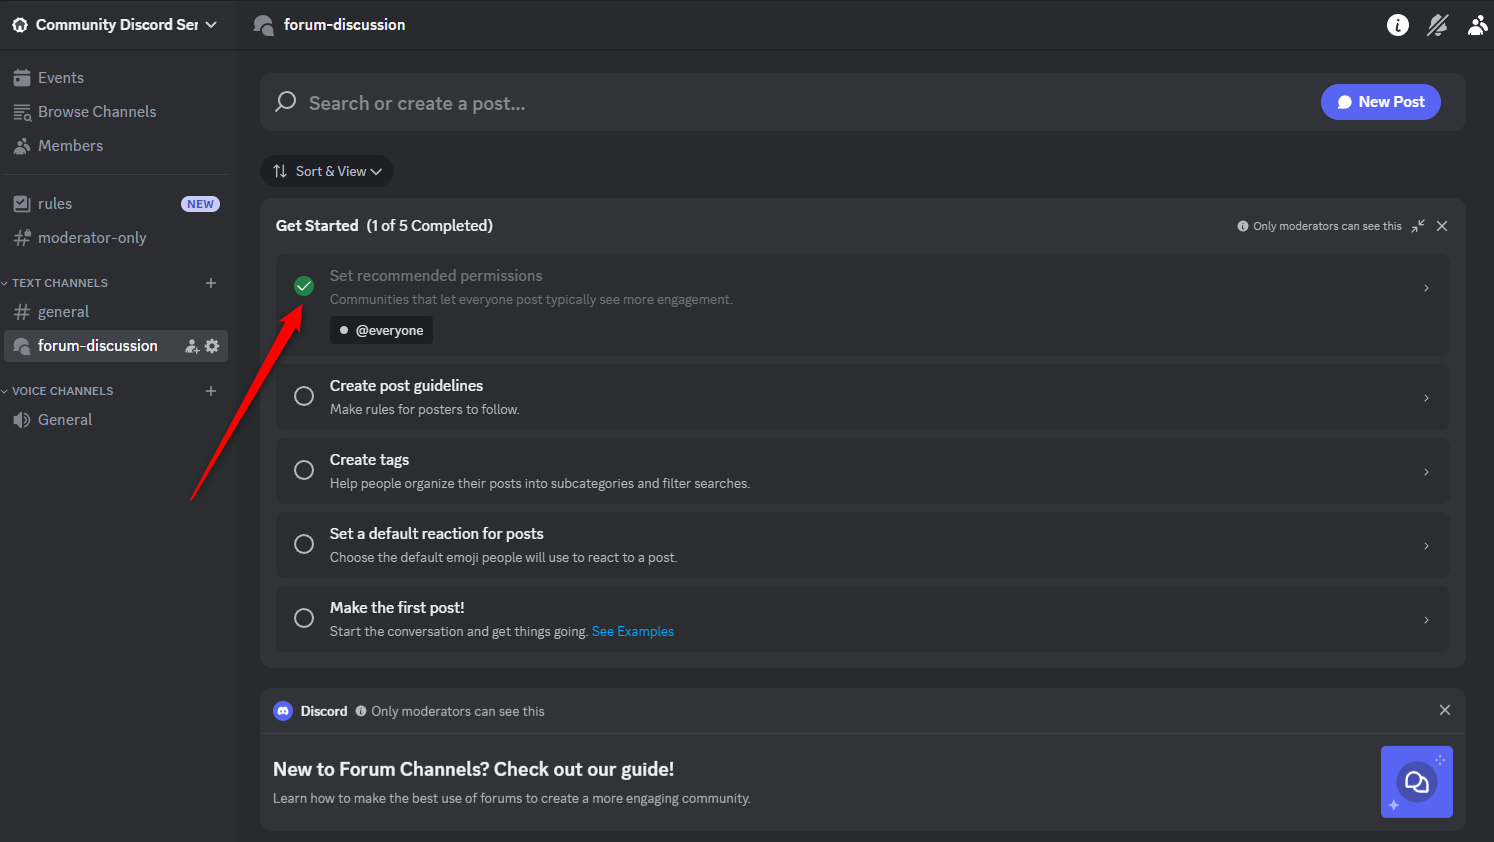 An example of the 'Get Started' menu when creating a Discord Forum channel with the 'Sect recommended permissions' checked off with a green checkmark.